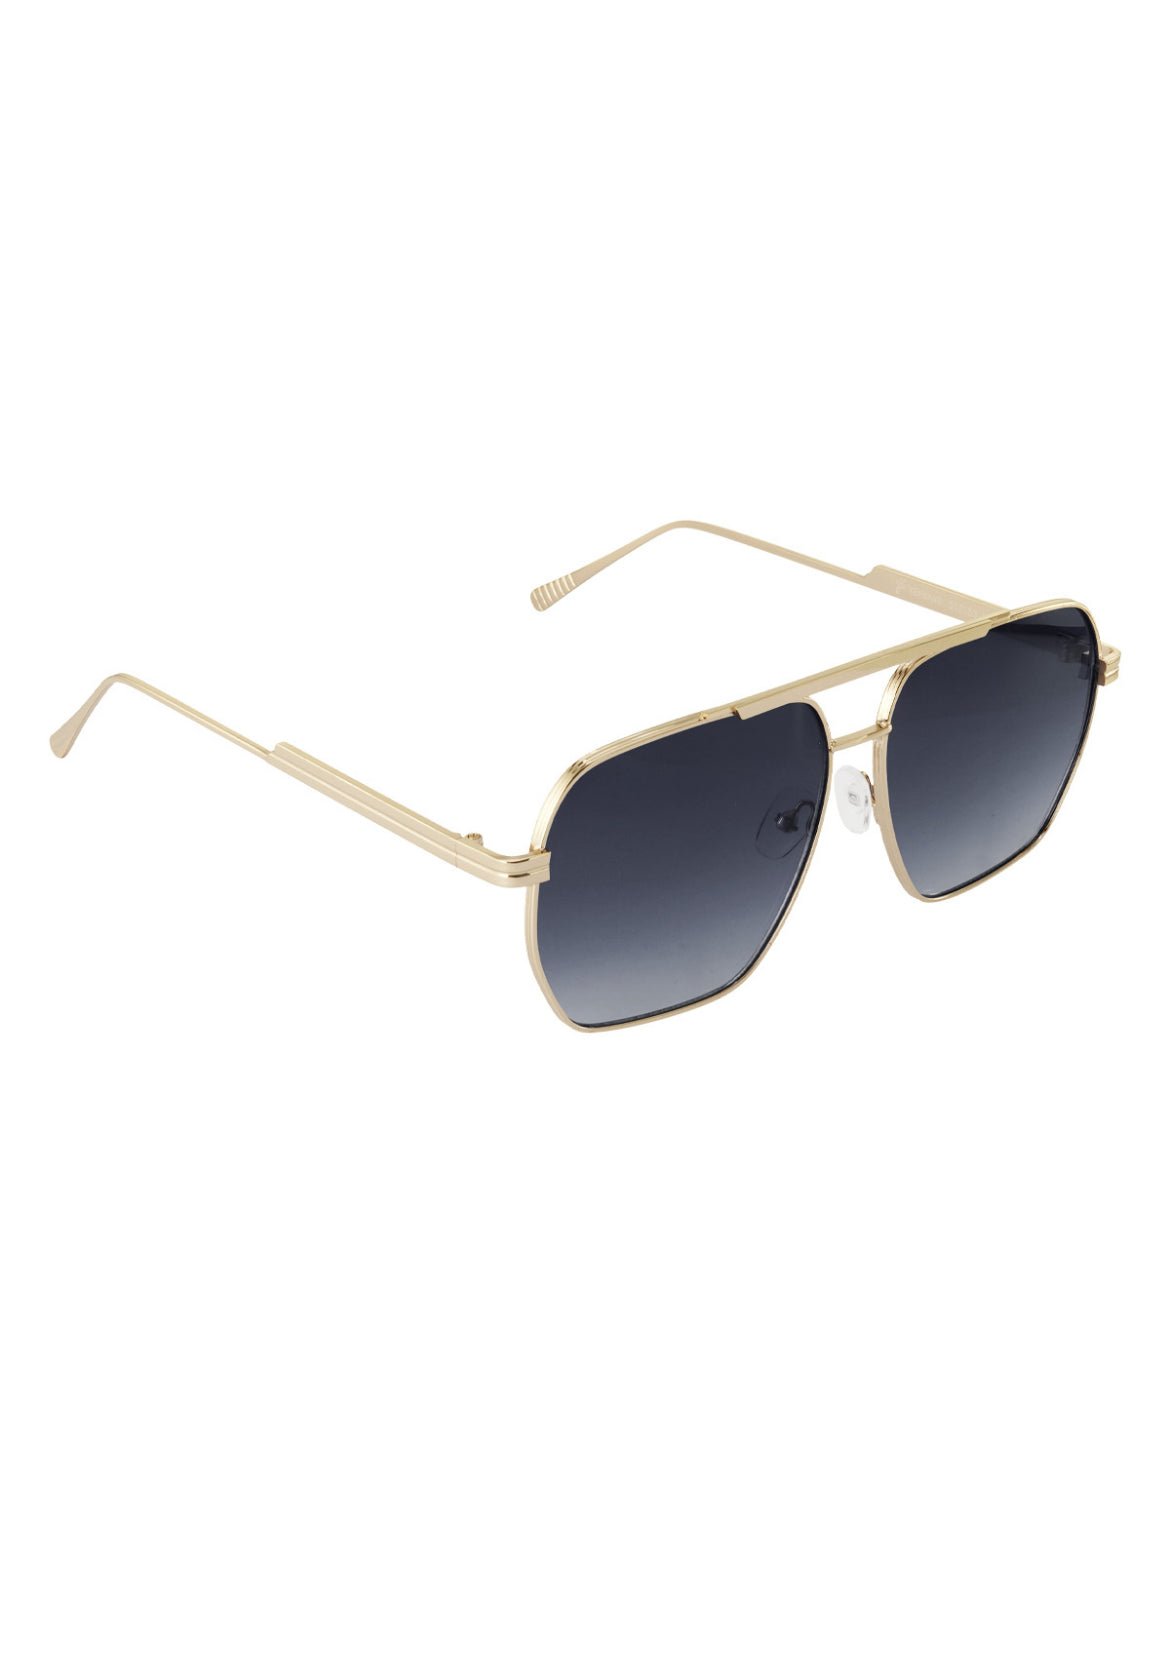 Metal summer sunglasses black and gold -